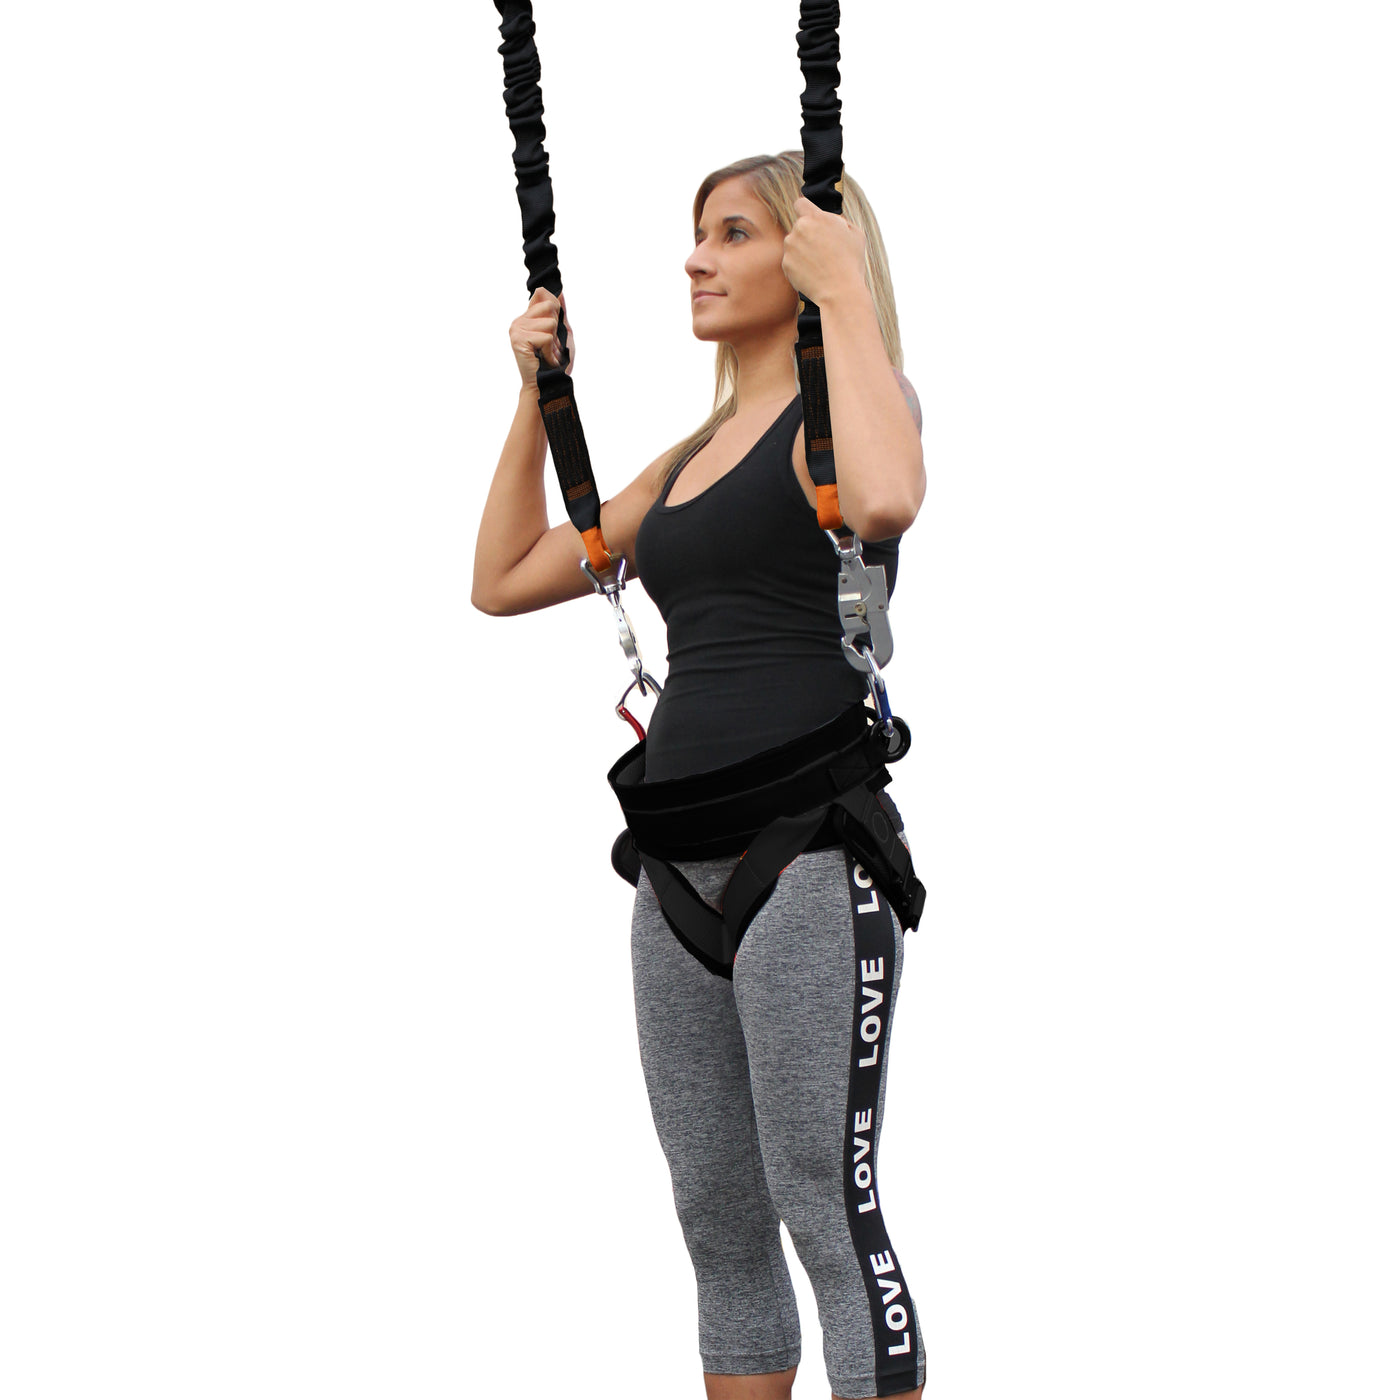 Theatrical Flying Harness